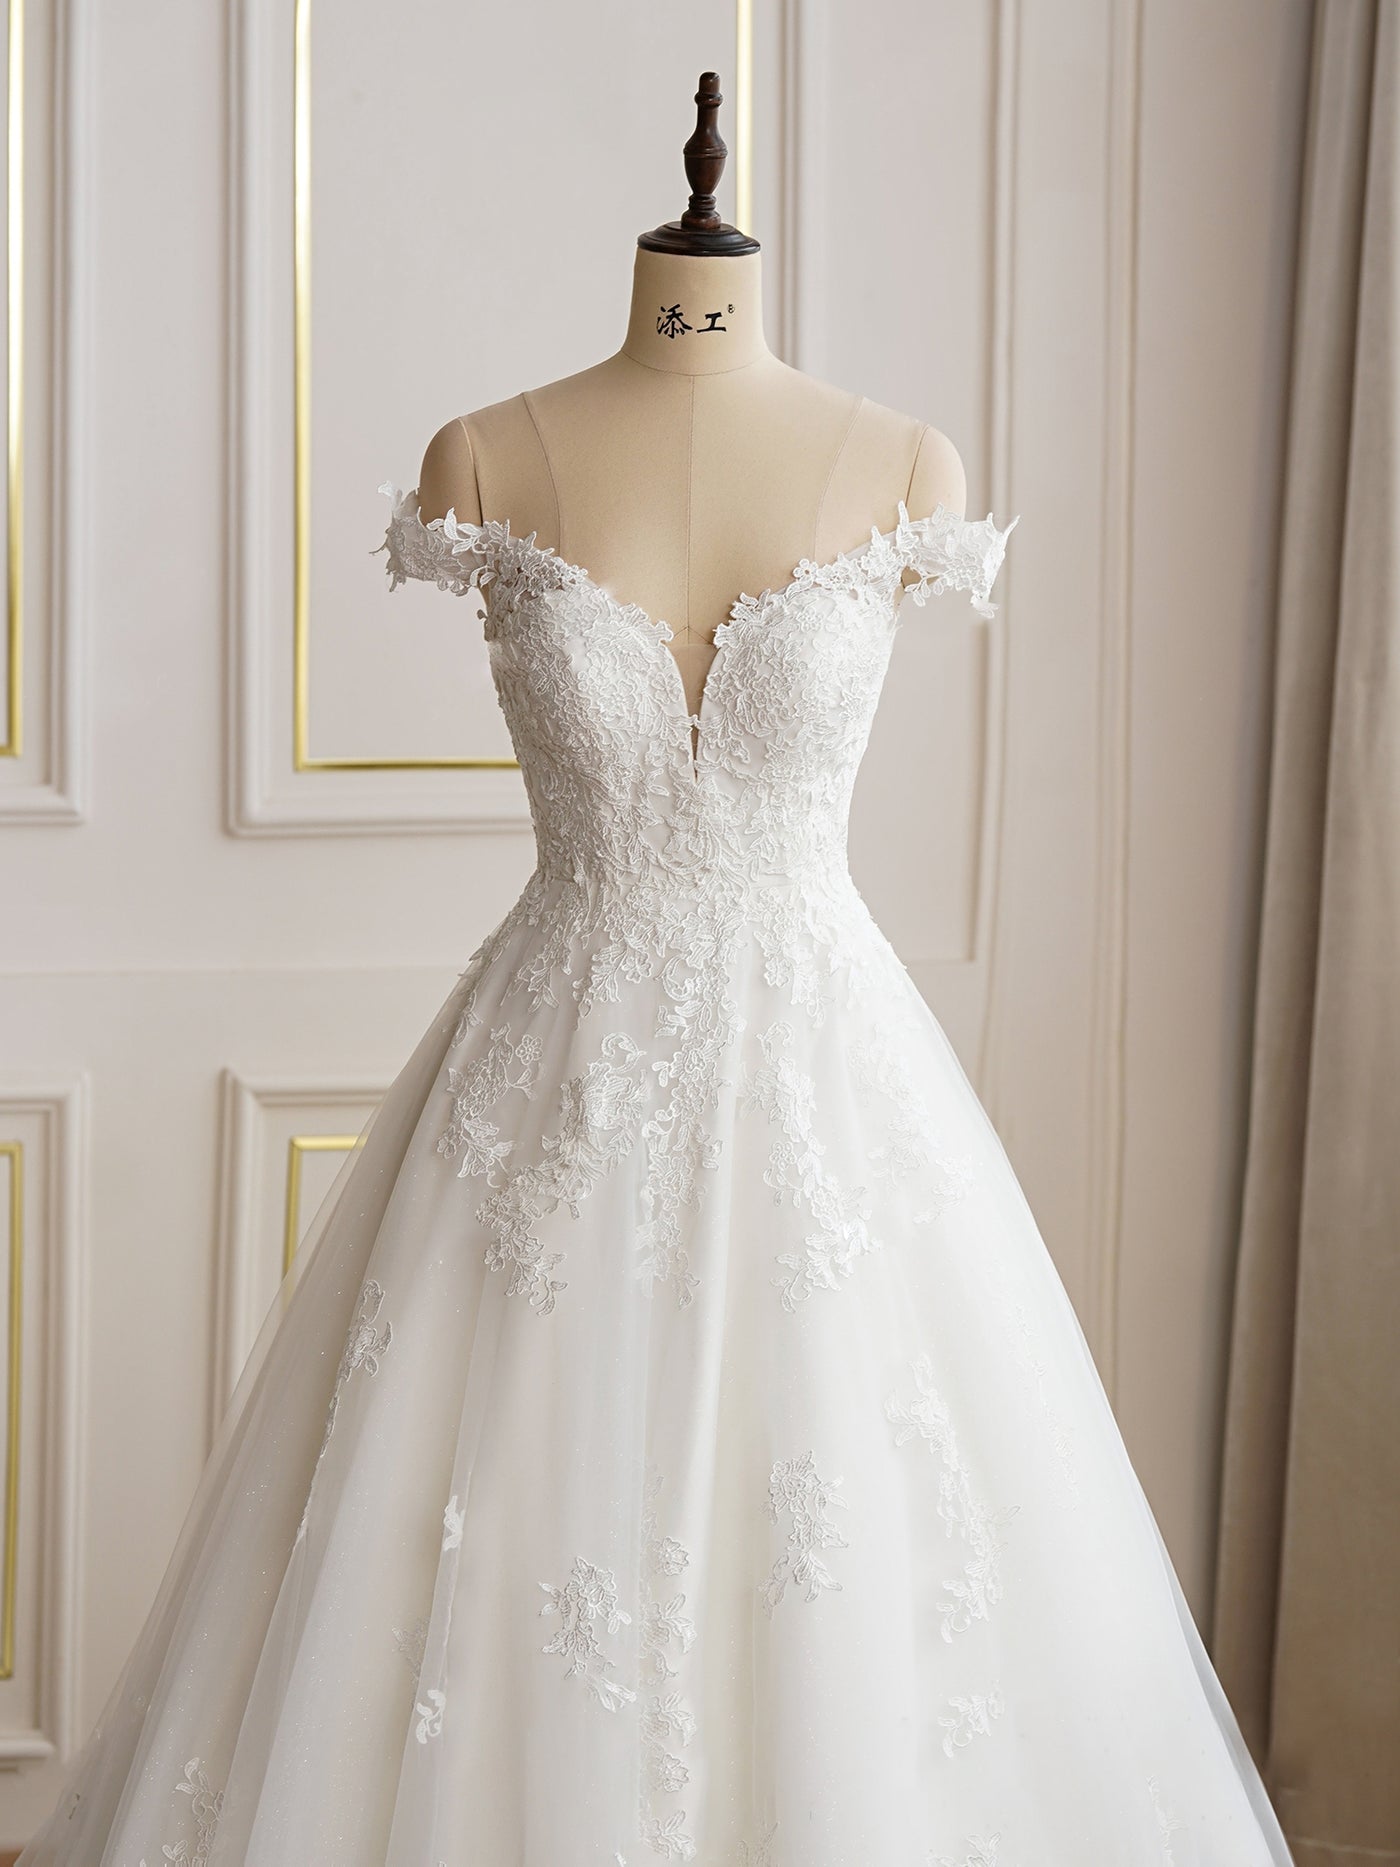 An Elegant Lace A-line Wedding Dress With Off the Shoulder Sleeves by Bergamot Bridal in a bridal shop.